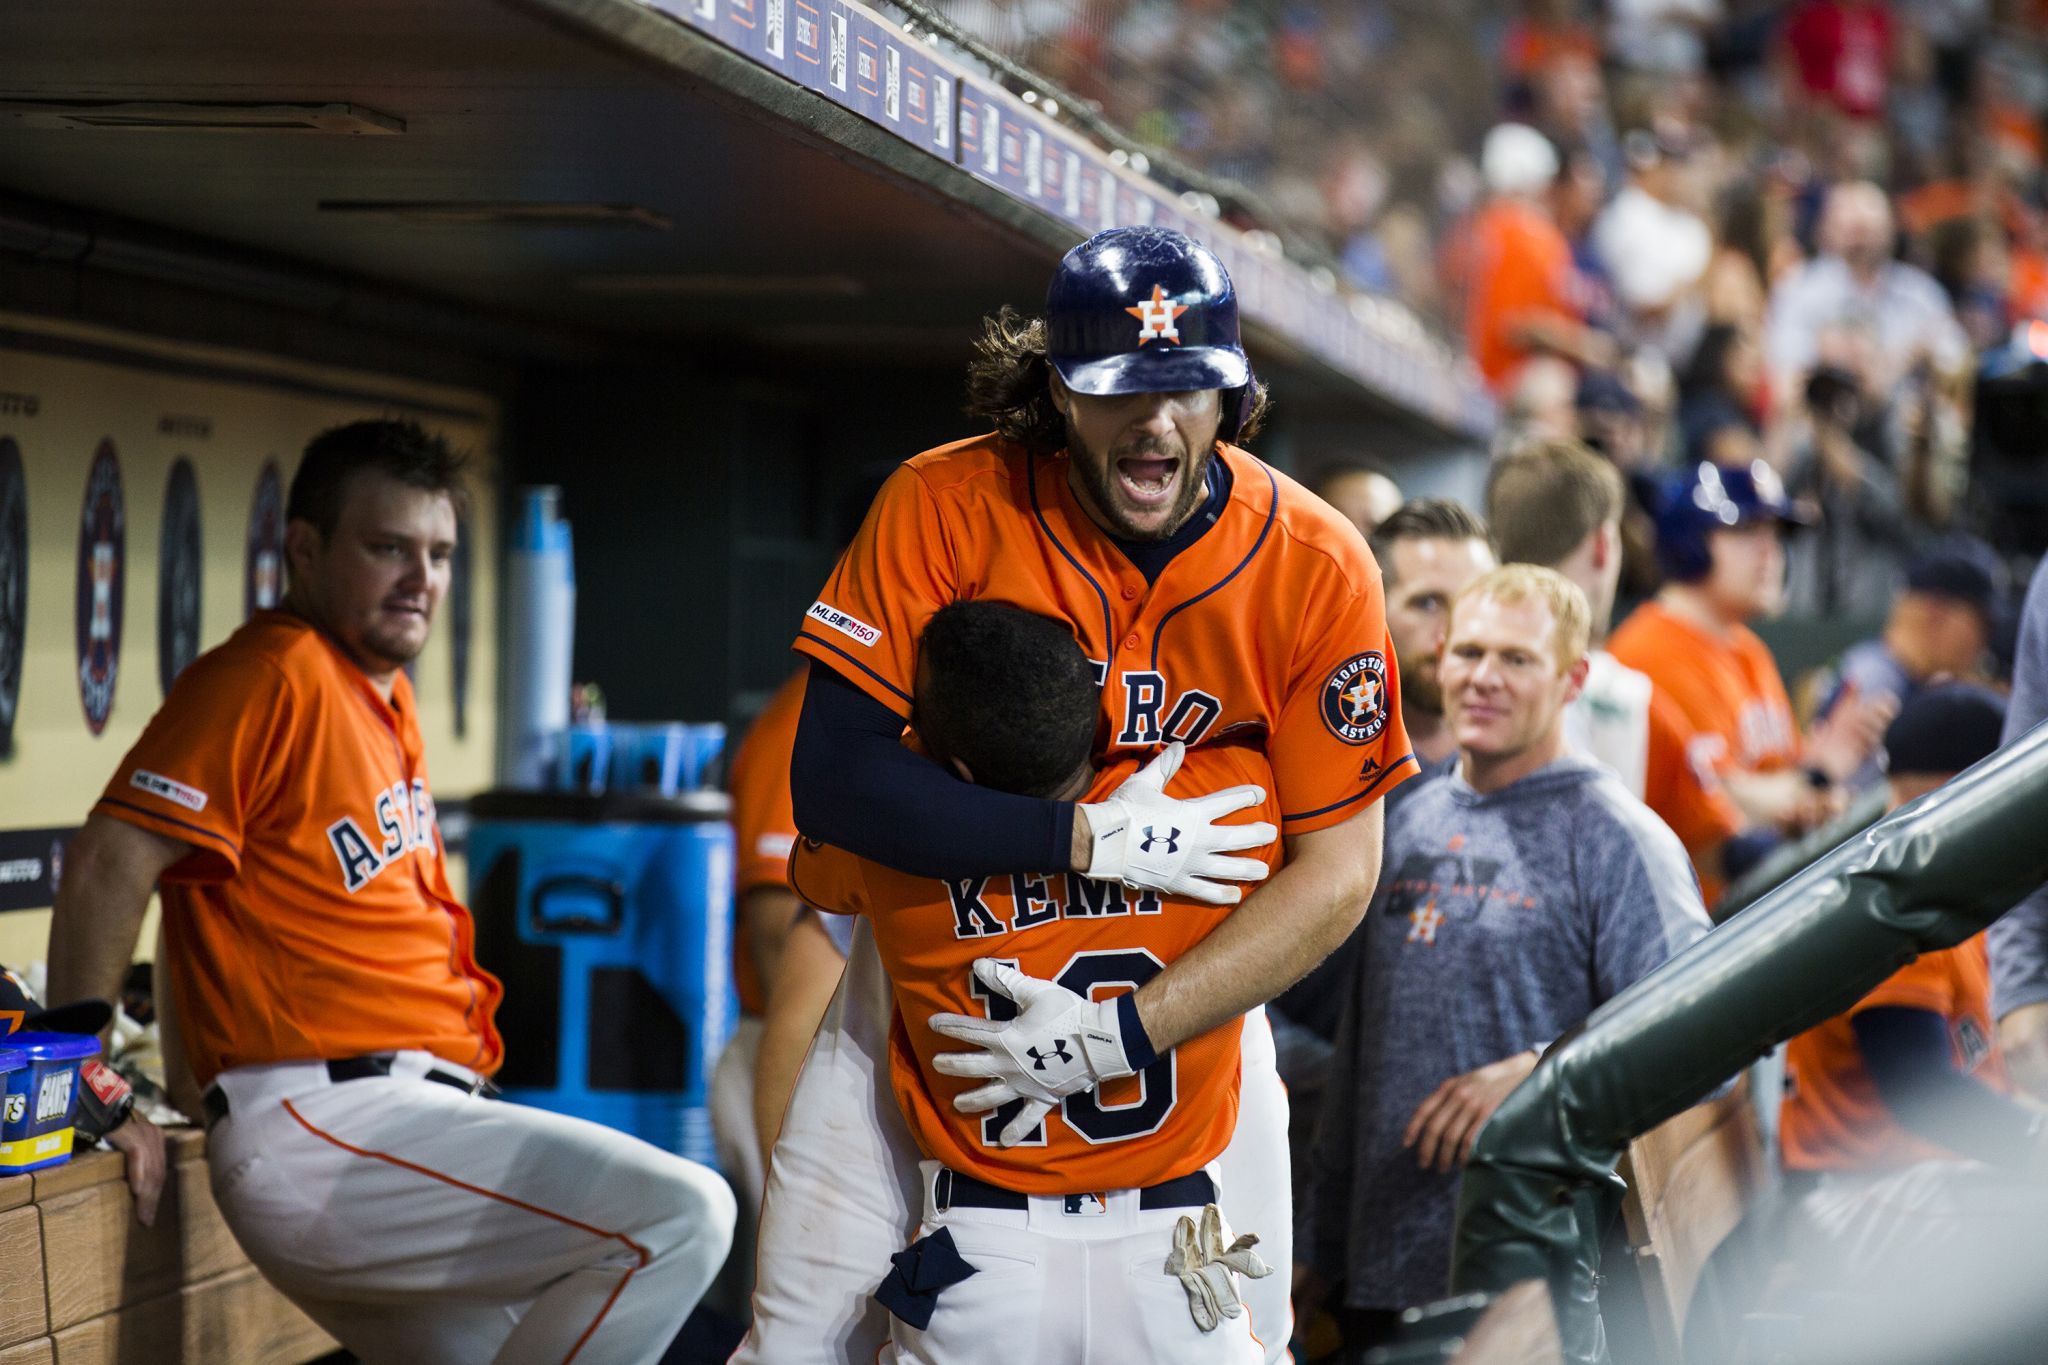 The 5-foot-6 Tony Kemp celebrated some Astros home runs by picking up his  teammates